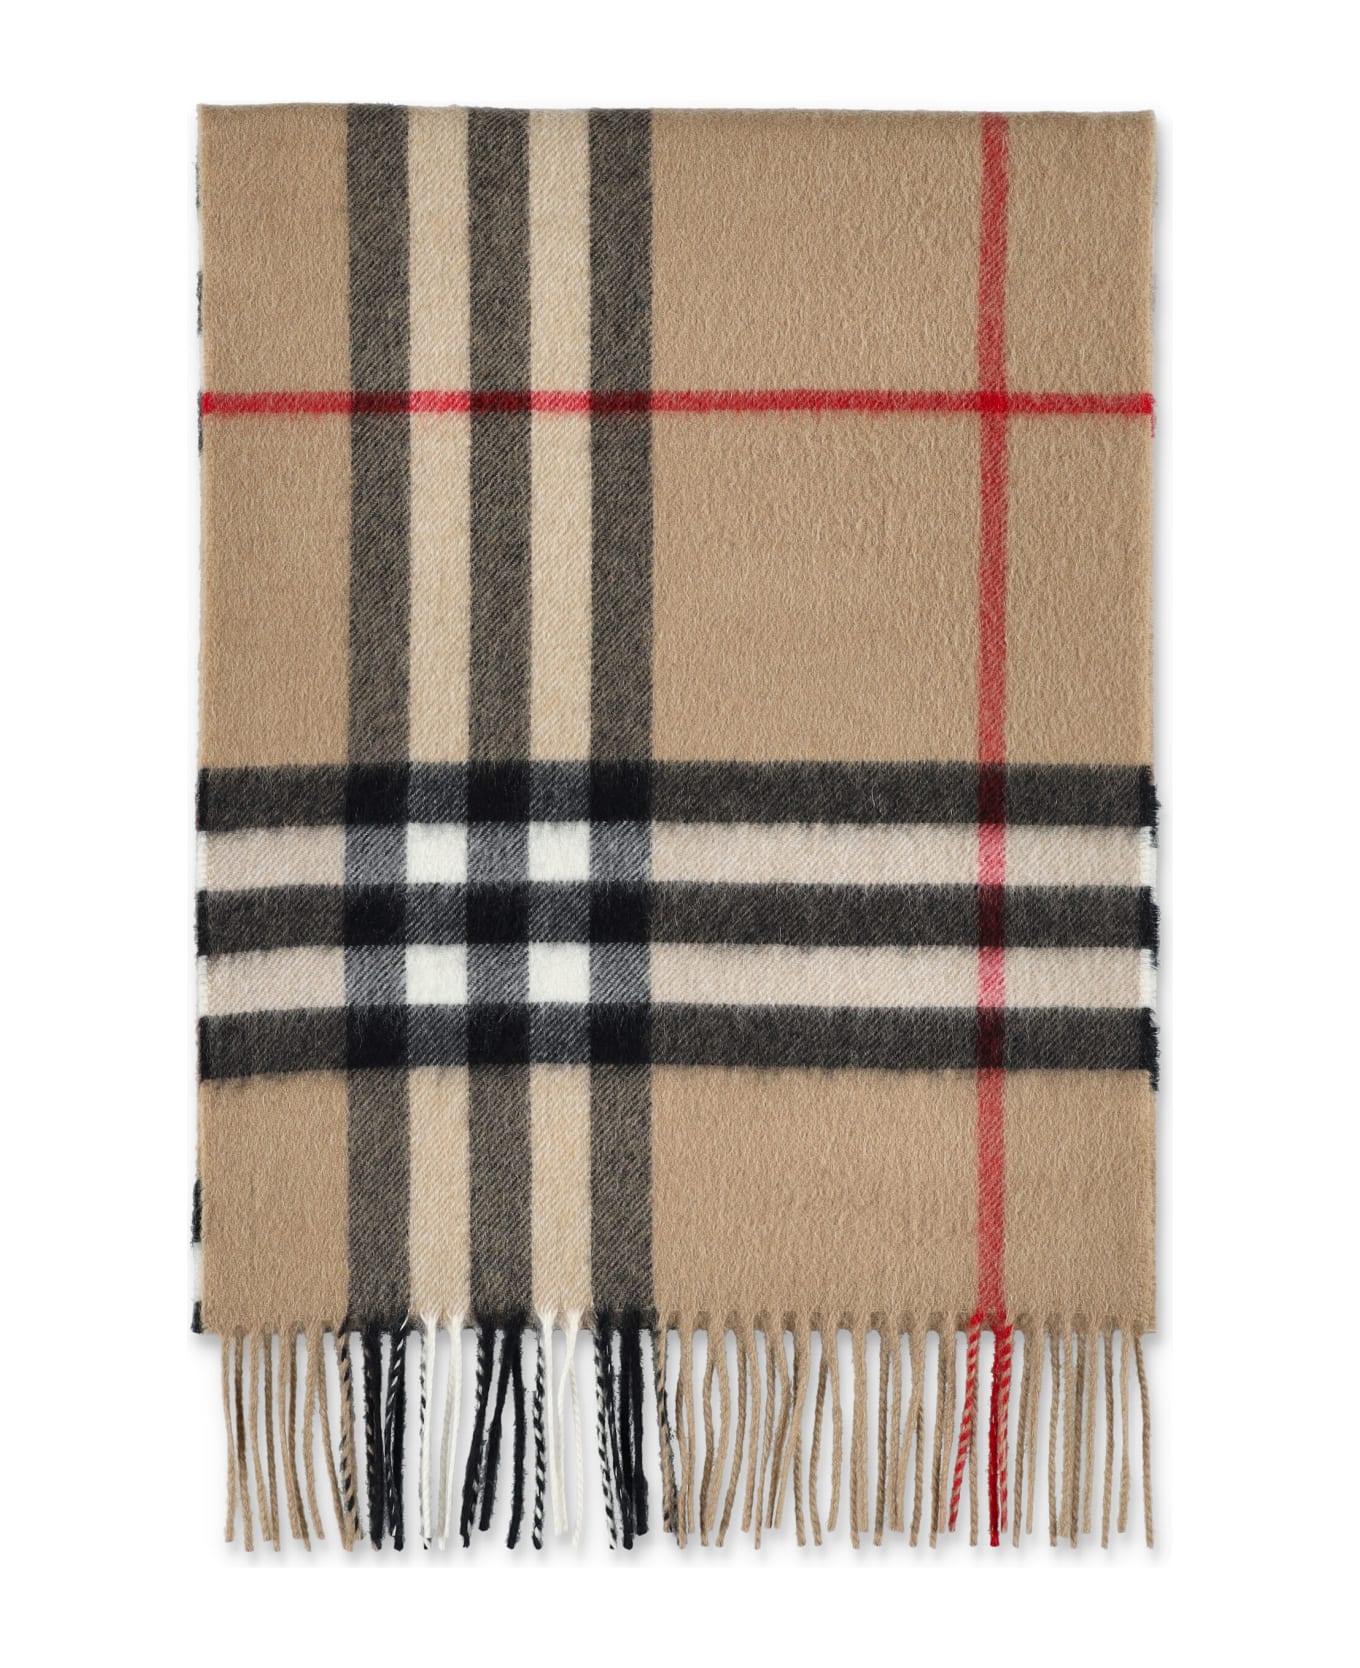 Burberry London Check Cashmere Scarf - ARCHIVE BEIGE